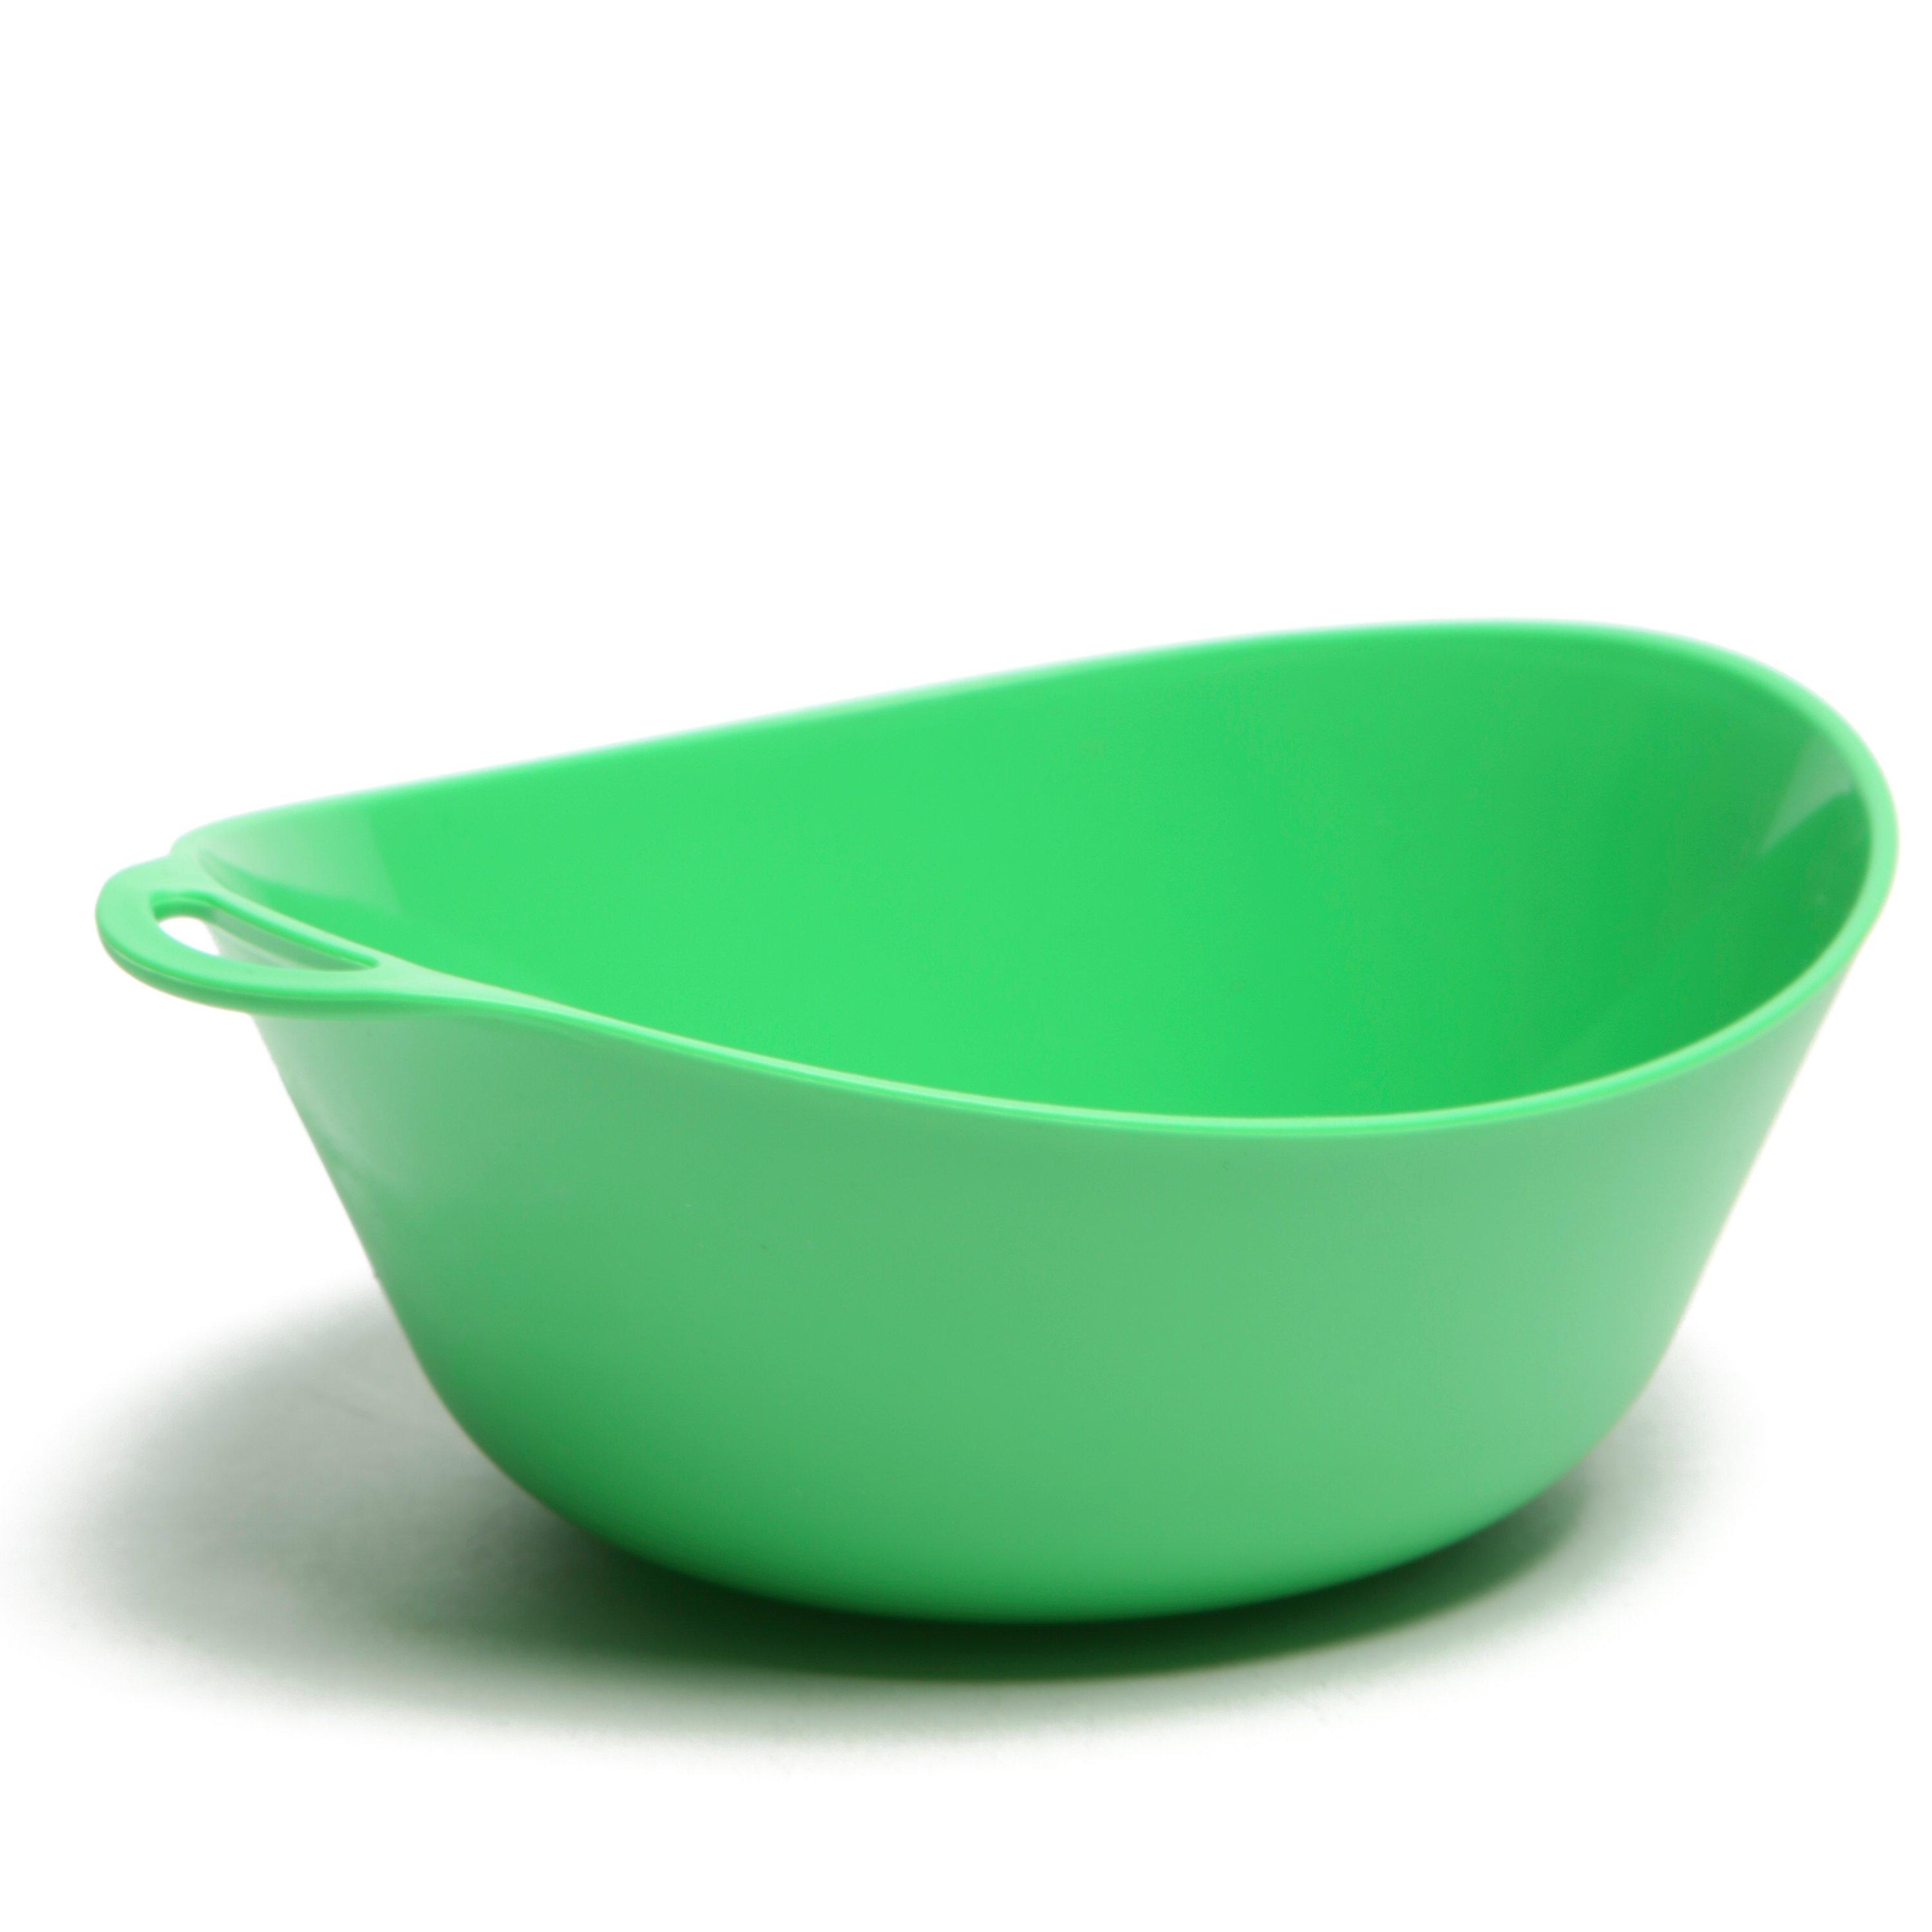 product image of Lifeventure Ellipse Bowl, Green